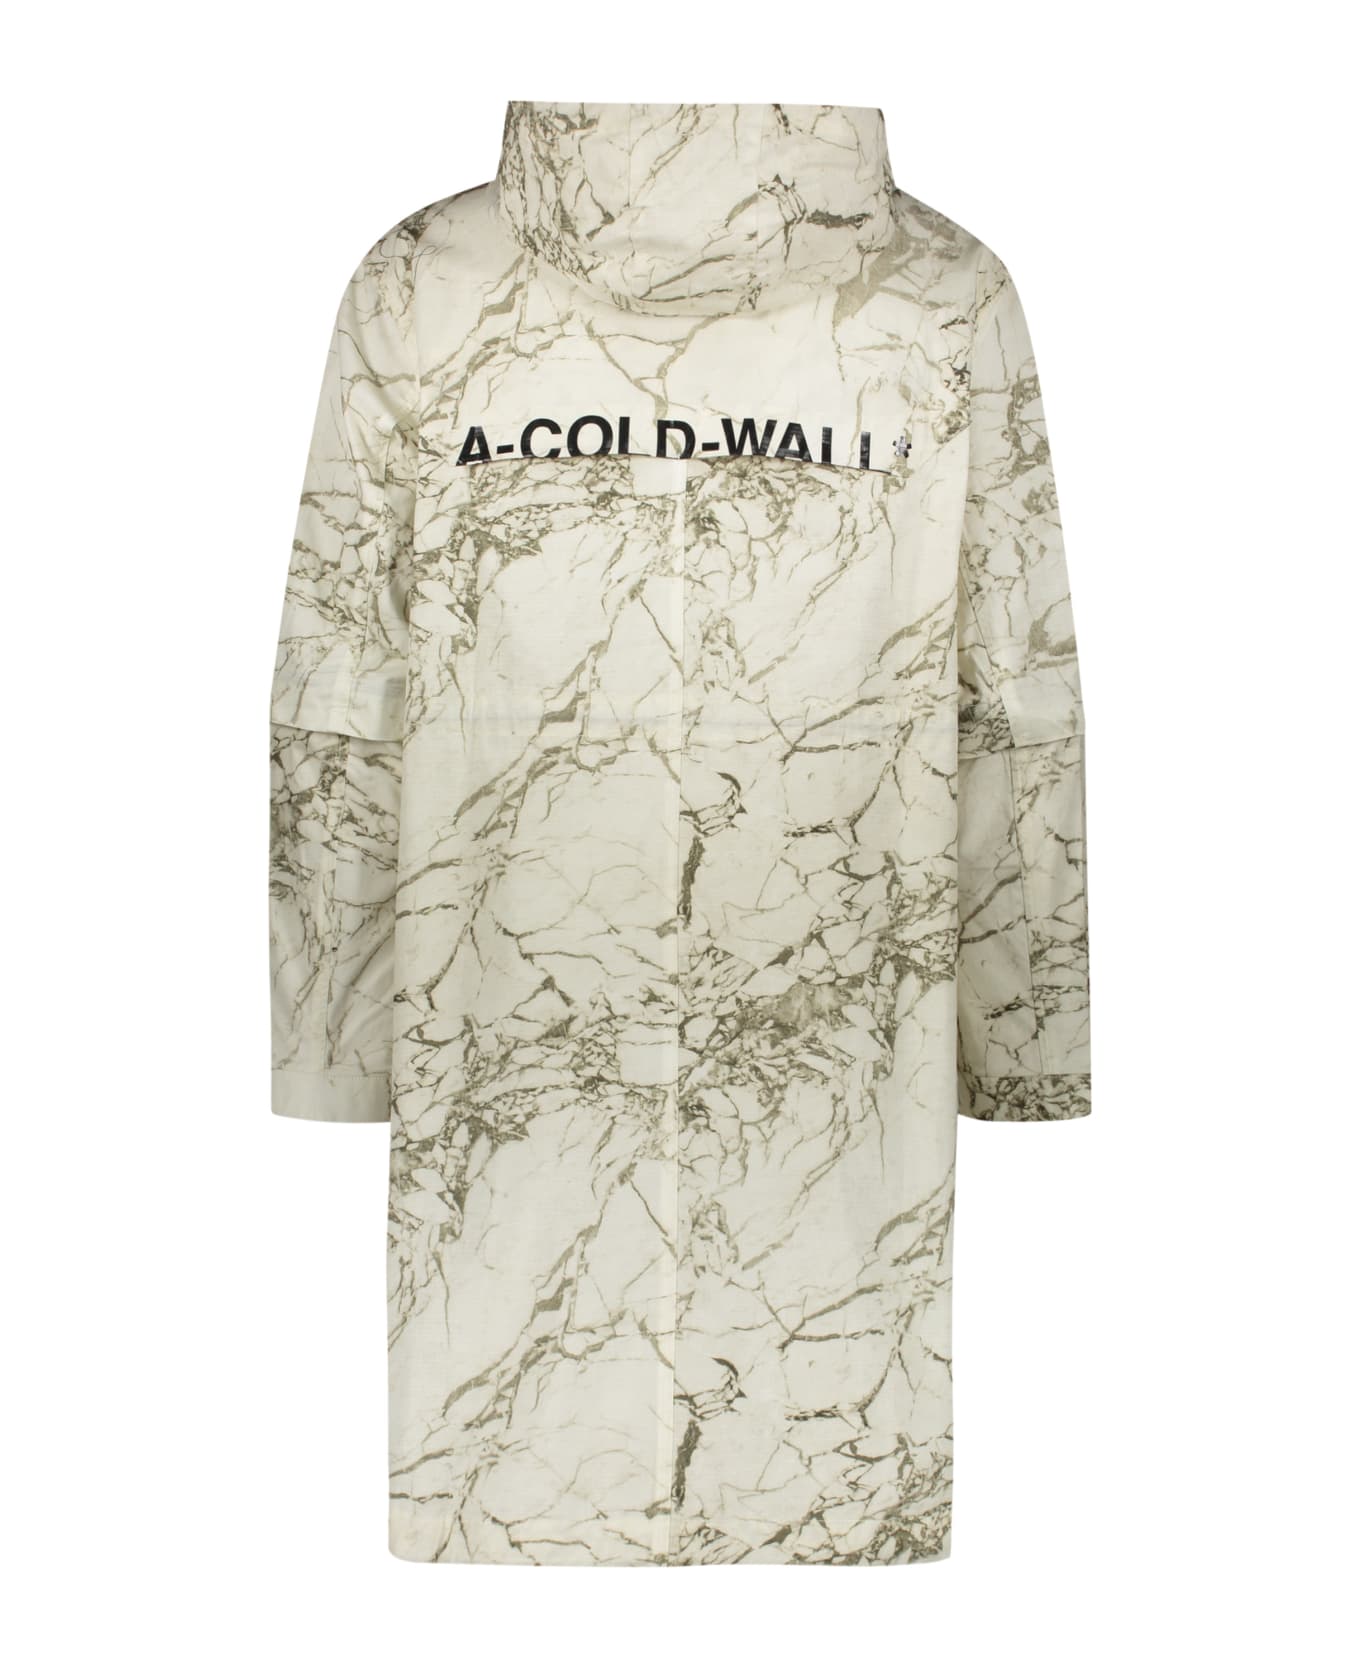 A-COLD-WALL Hooded Cotton Parka - Ivory